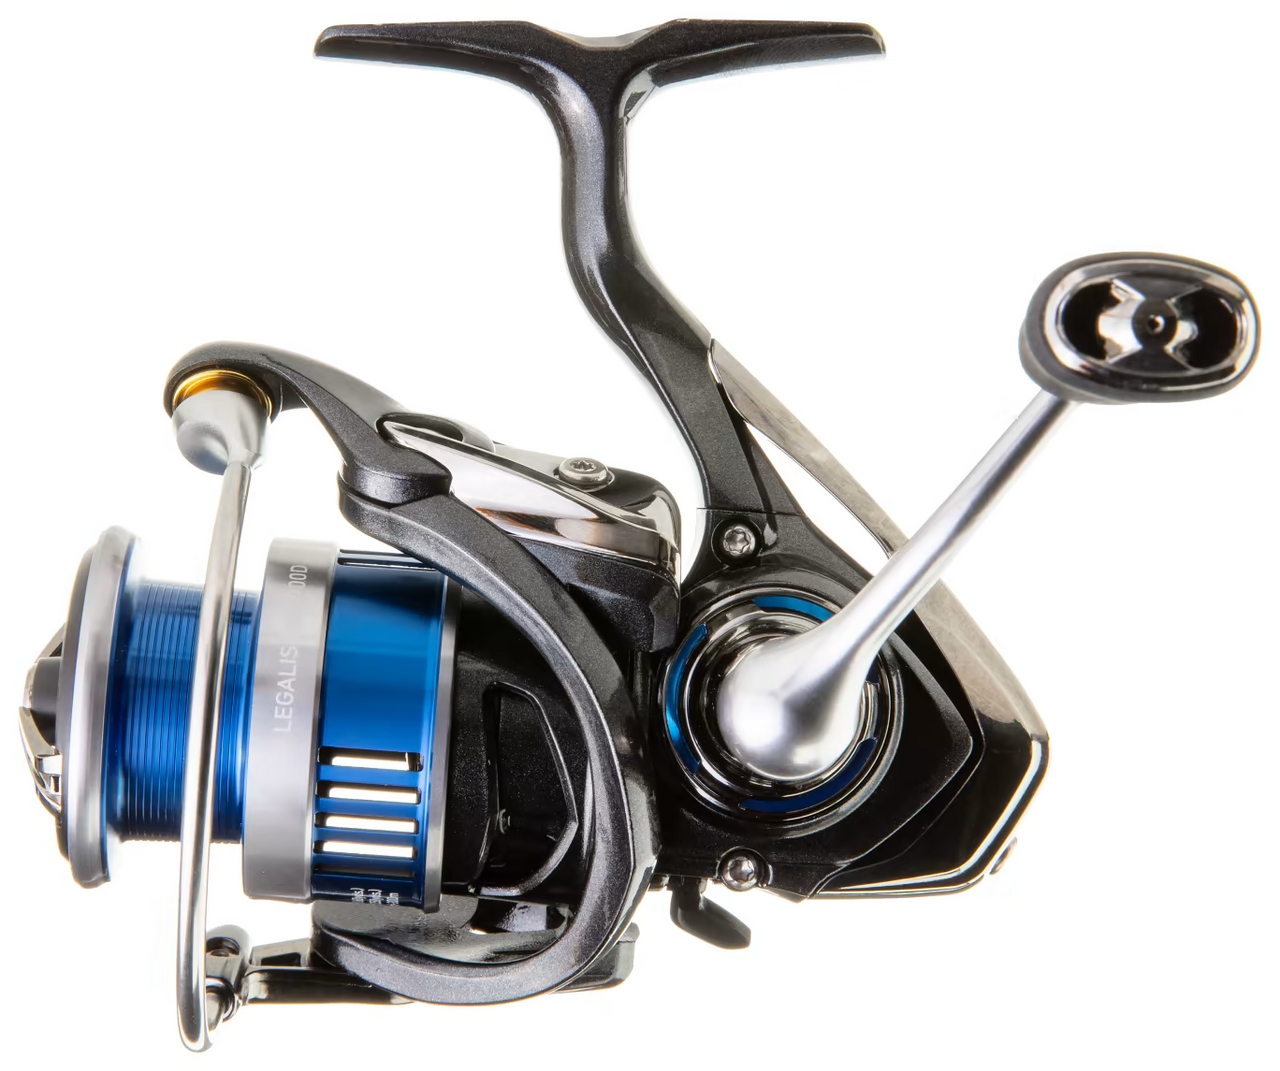 https://cdn11.bigcommerce.com/s-s7ib93jl4n/images/stencil/1280x1280/products/27892/84261/daiwa-legalis-lt-spinning-reel-2__79412.1679494779.png?c=2?imbypass=on